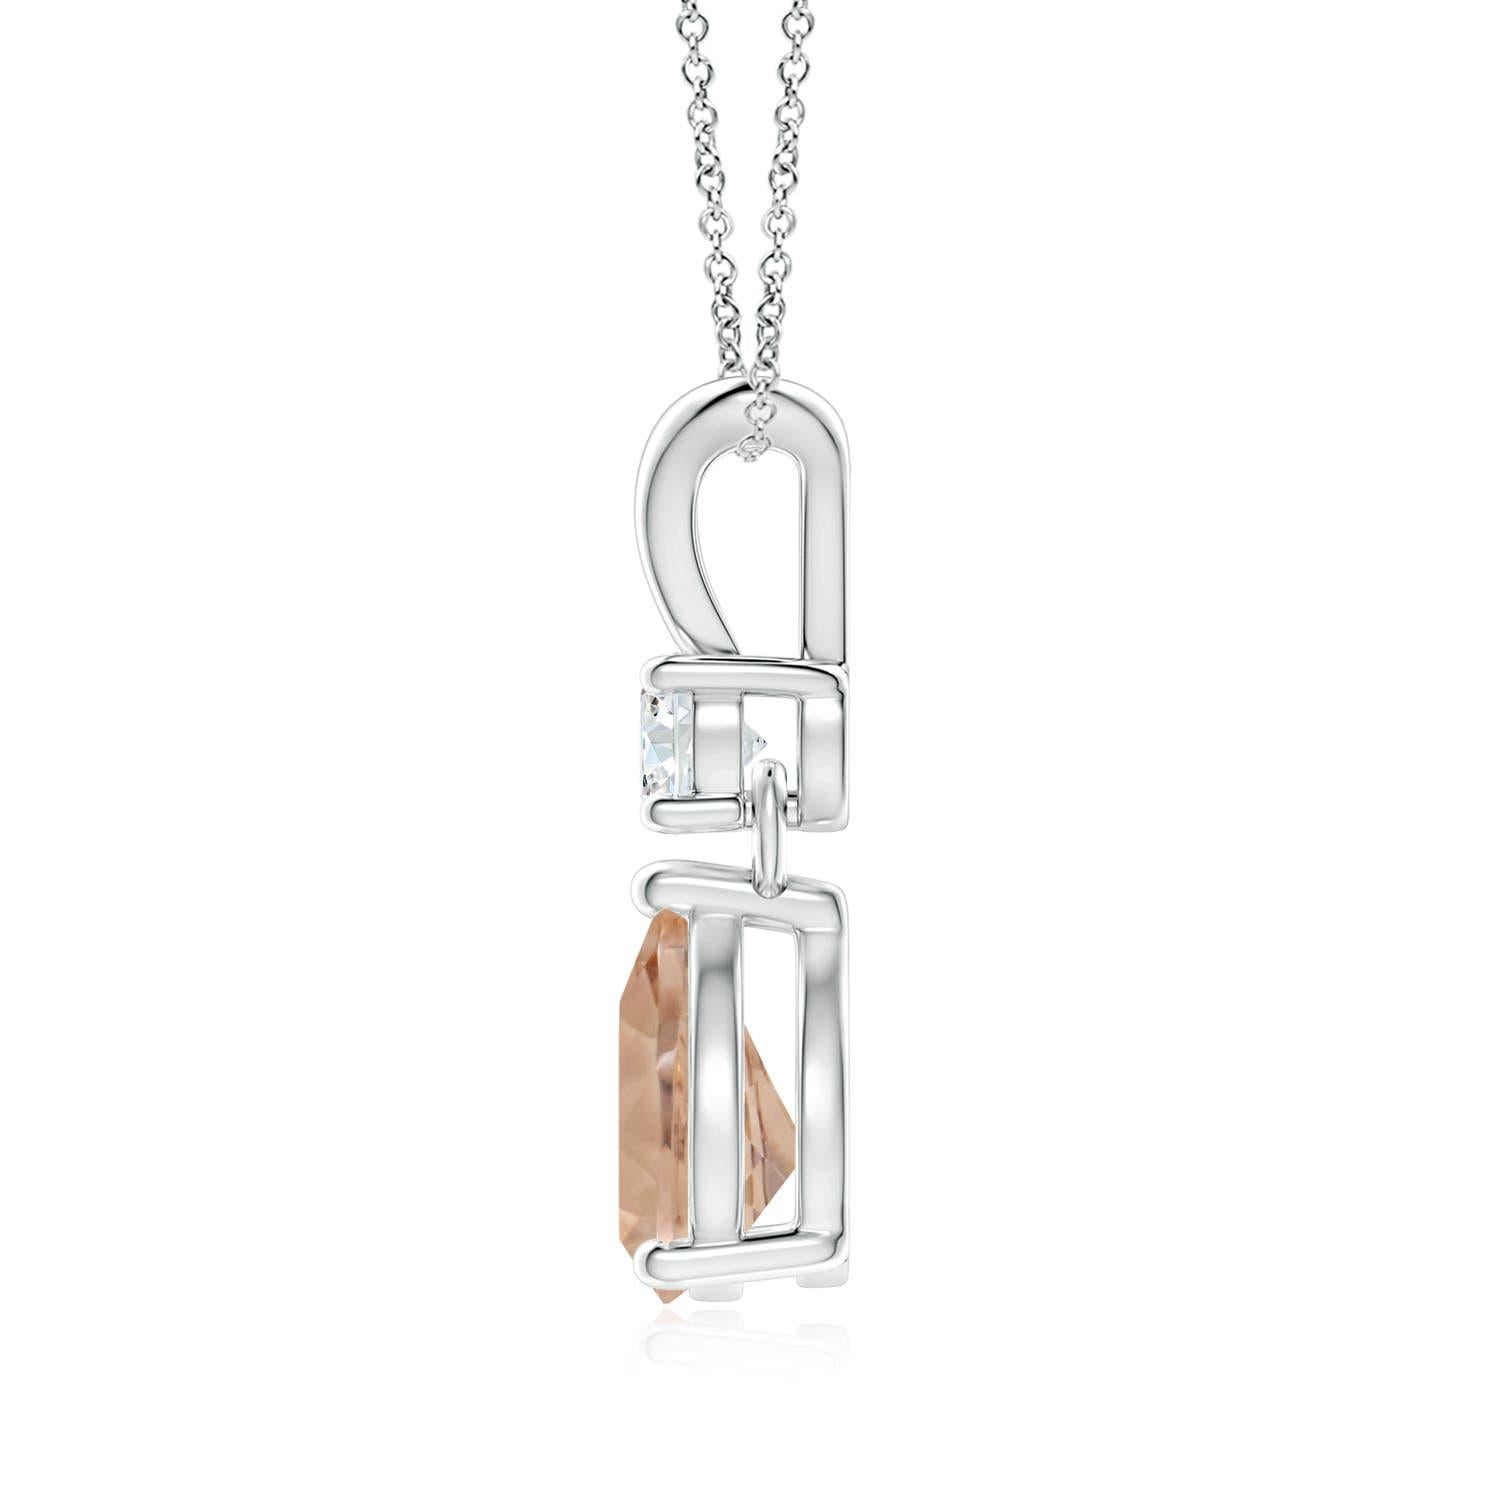 The GIA certified pear-shaped morganite is mounted in a prong setting. It is topped with a sparkling diamond and linked to a stylish V-bale. This 18k white gold pendant has an unmissable feminine flair.
